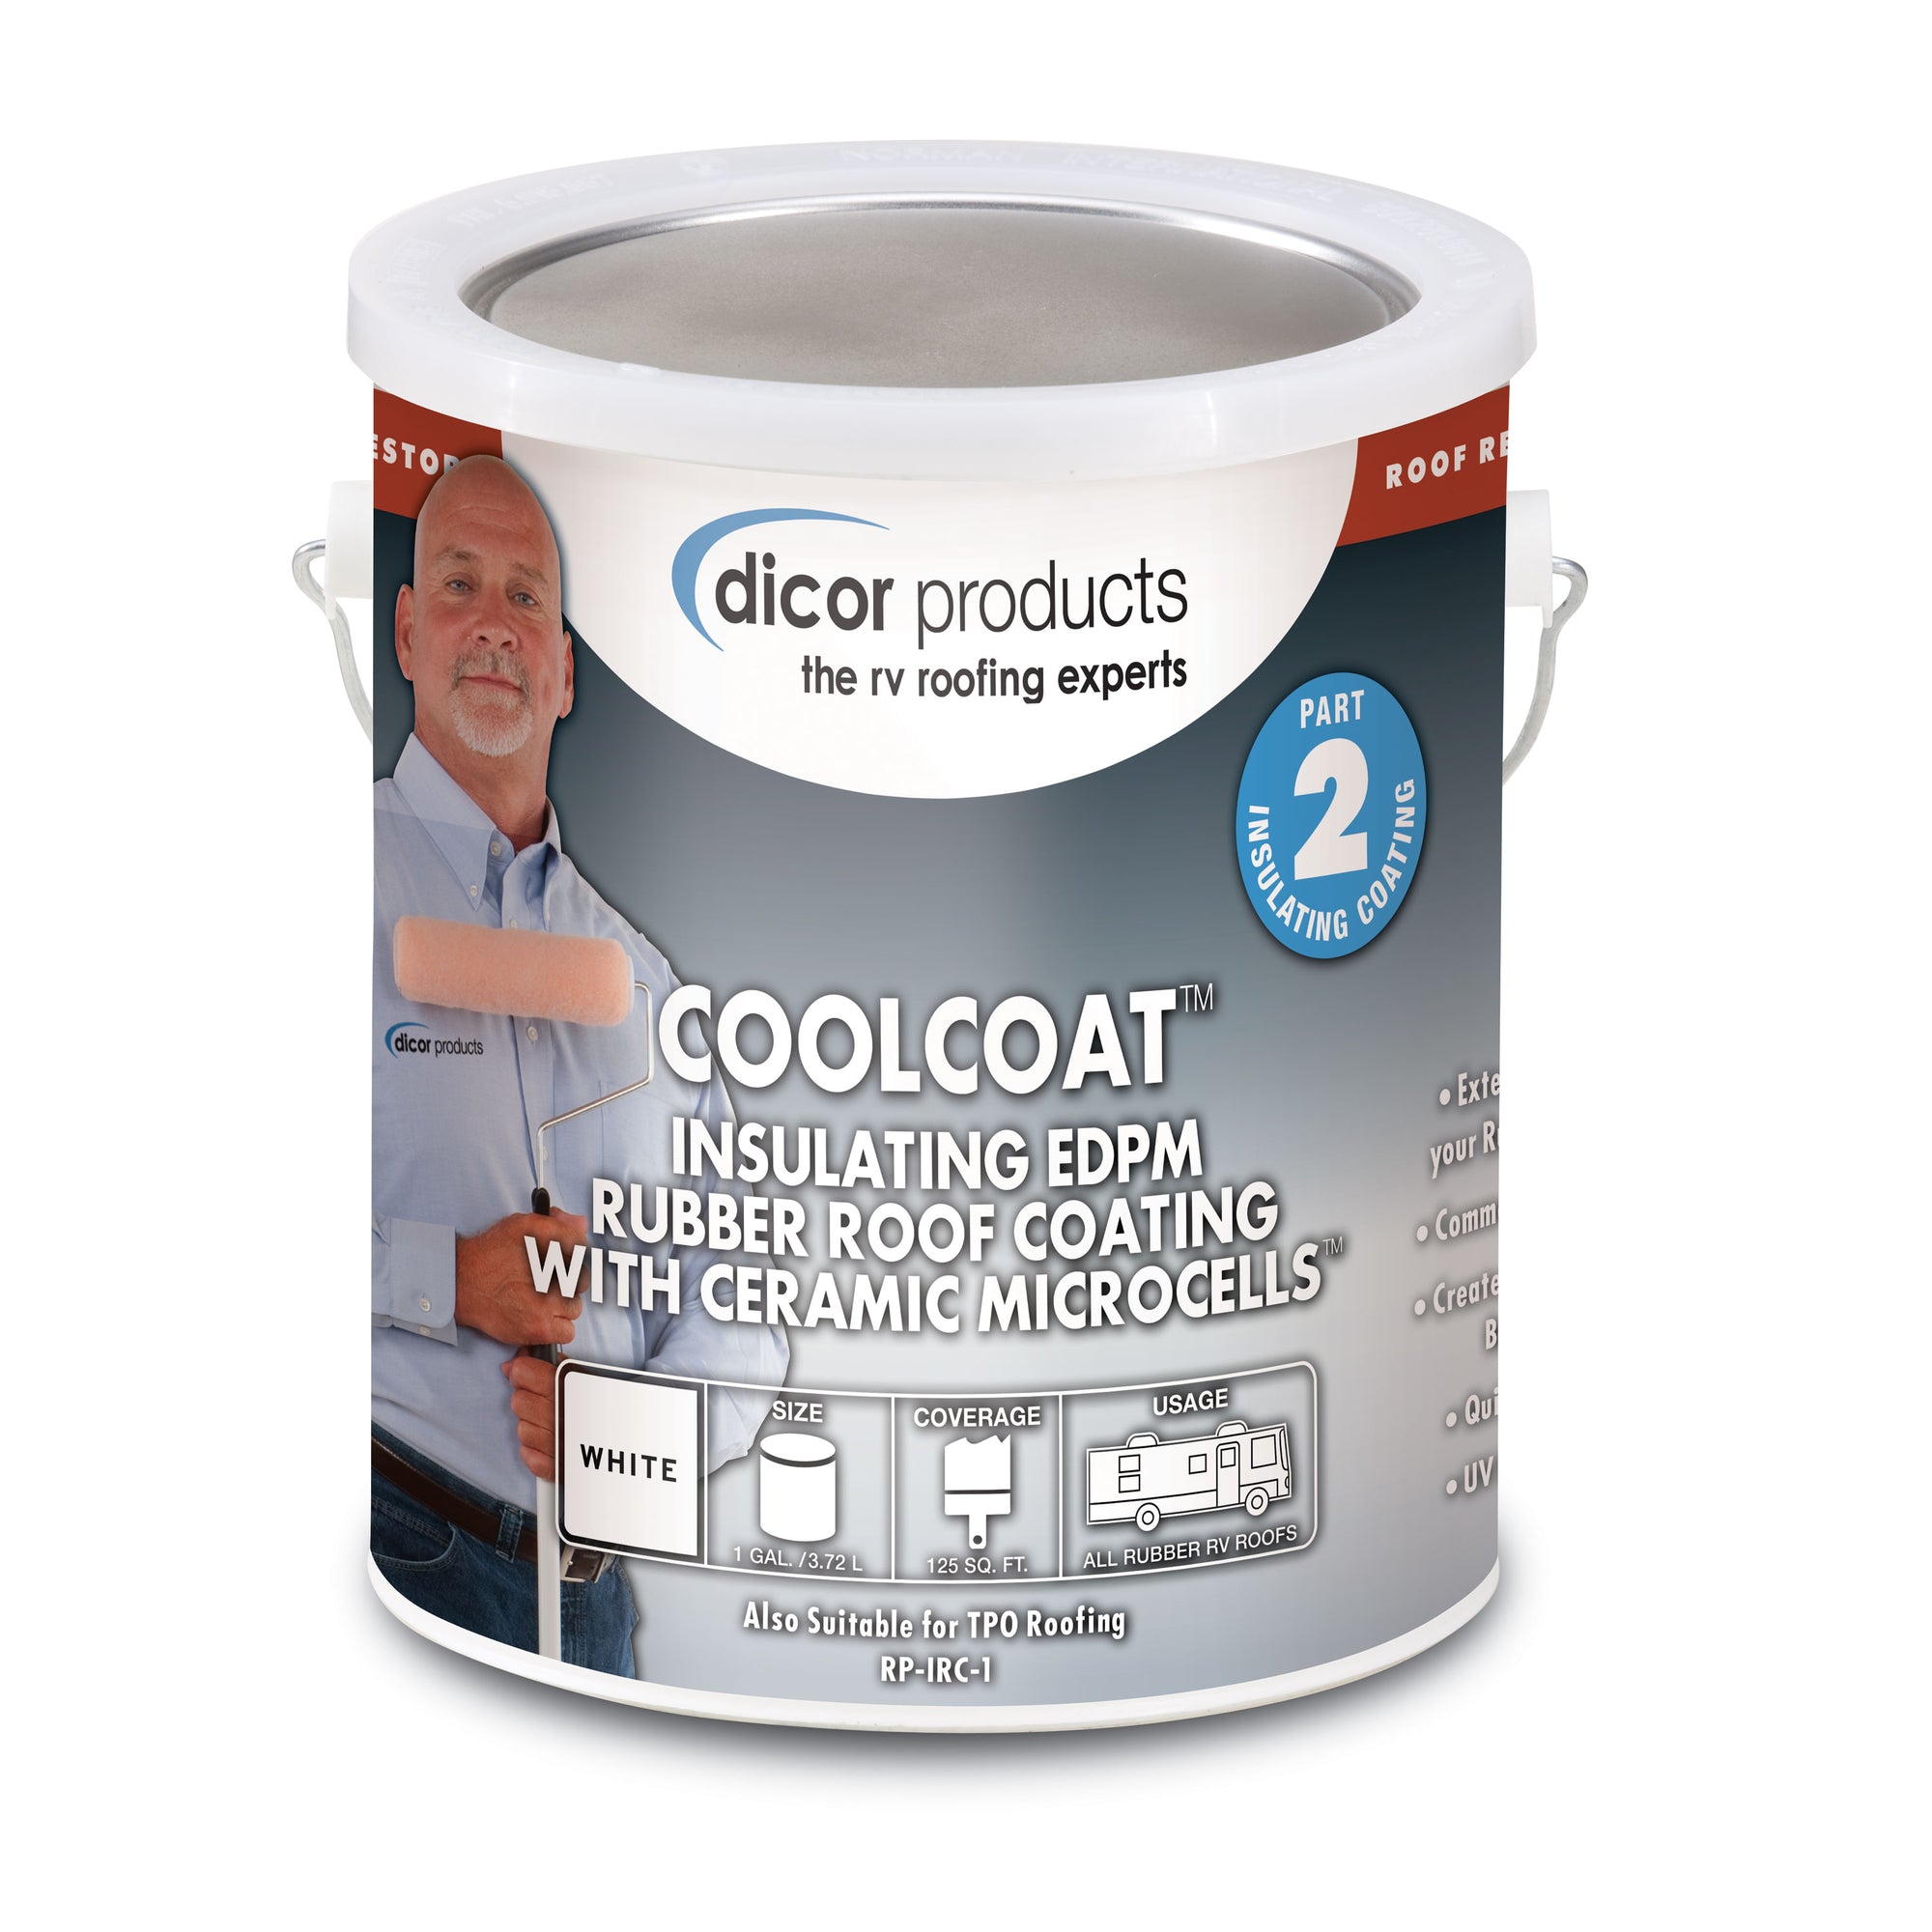 Dicor RP-IRCT-1 Coolcoat Insulating EPDM Roof Coating - 1 Gallon, Tan